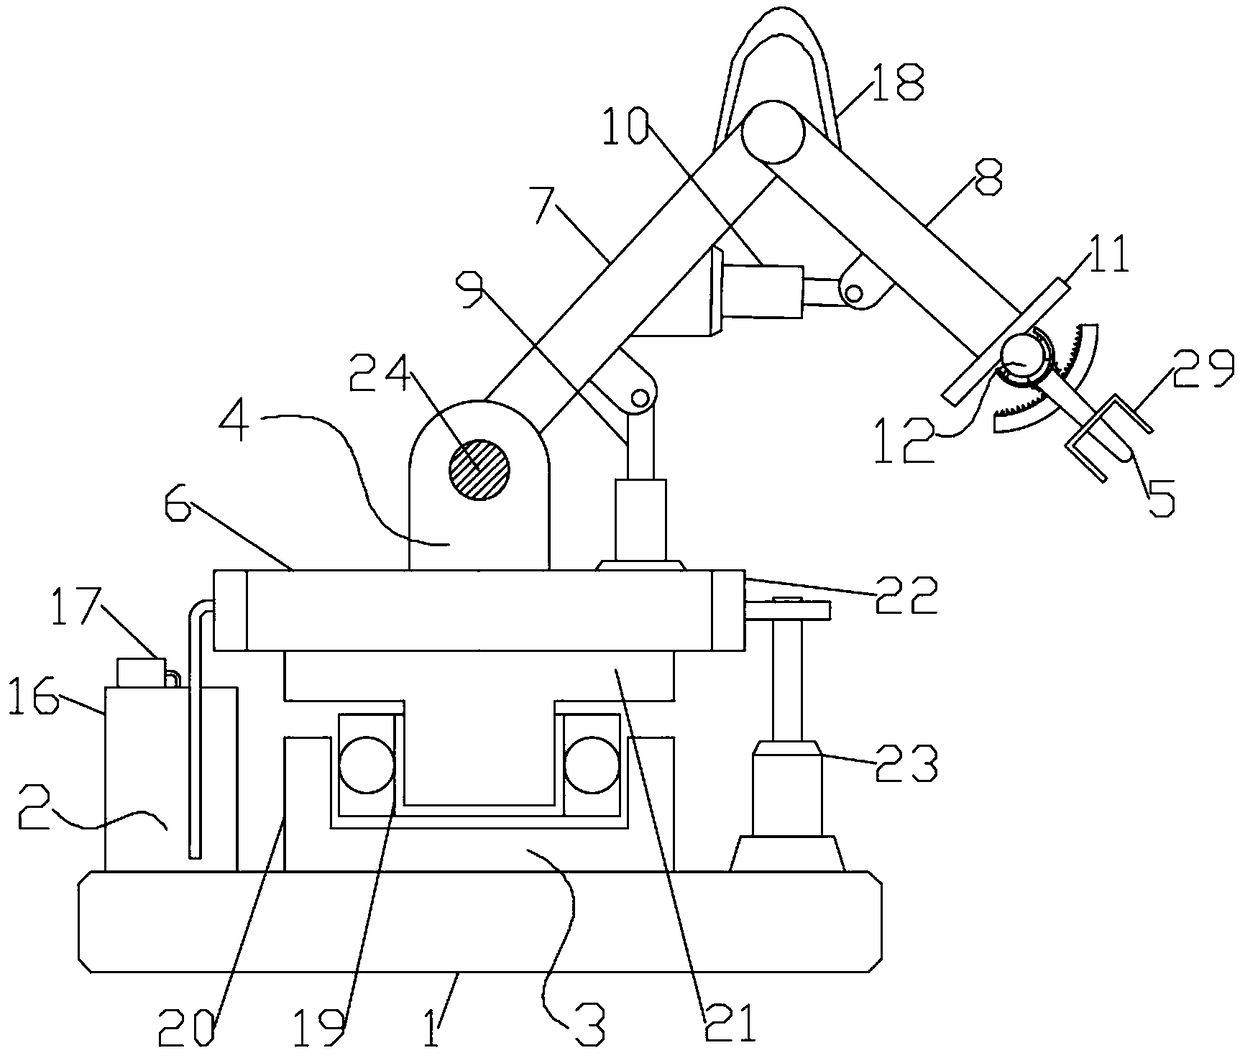 Structural nondestructive hydraulic dismantling robot